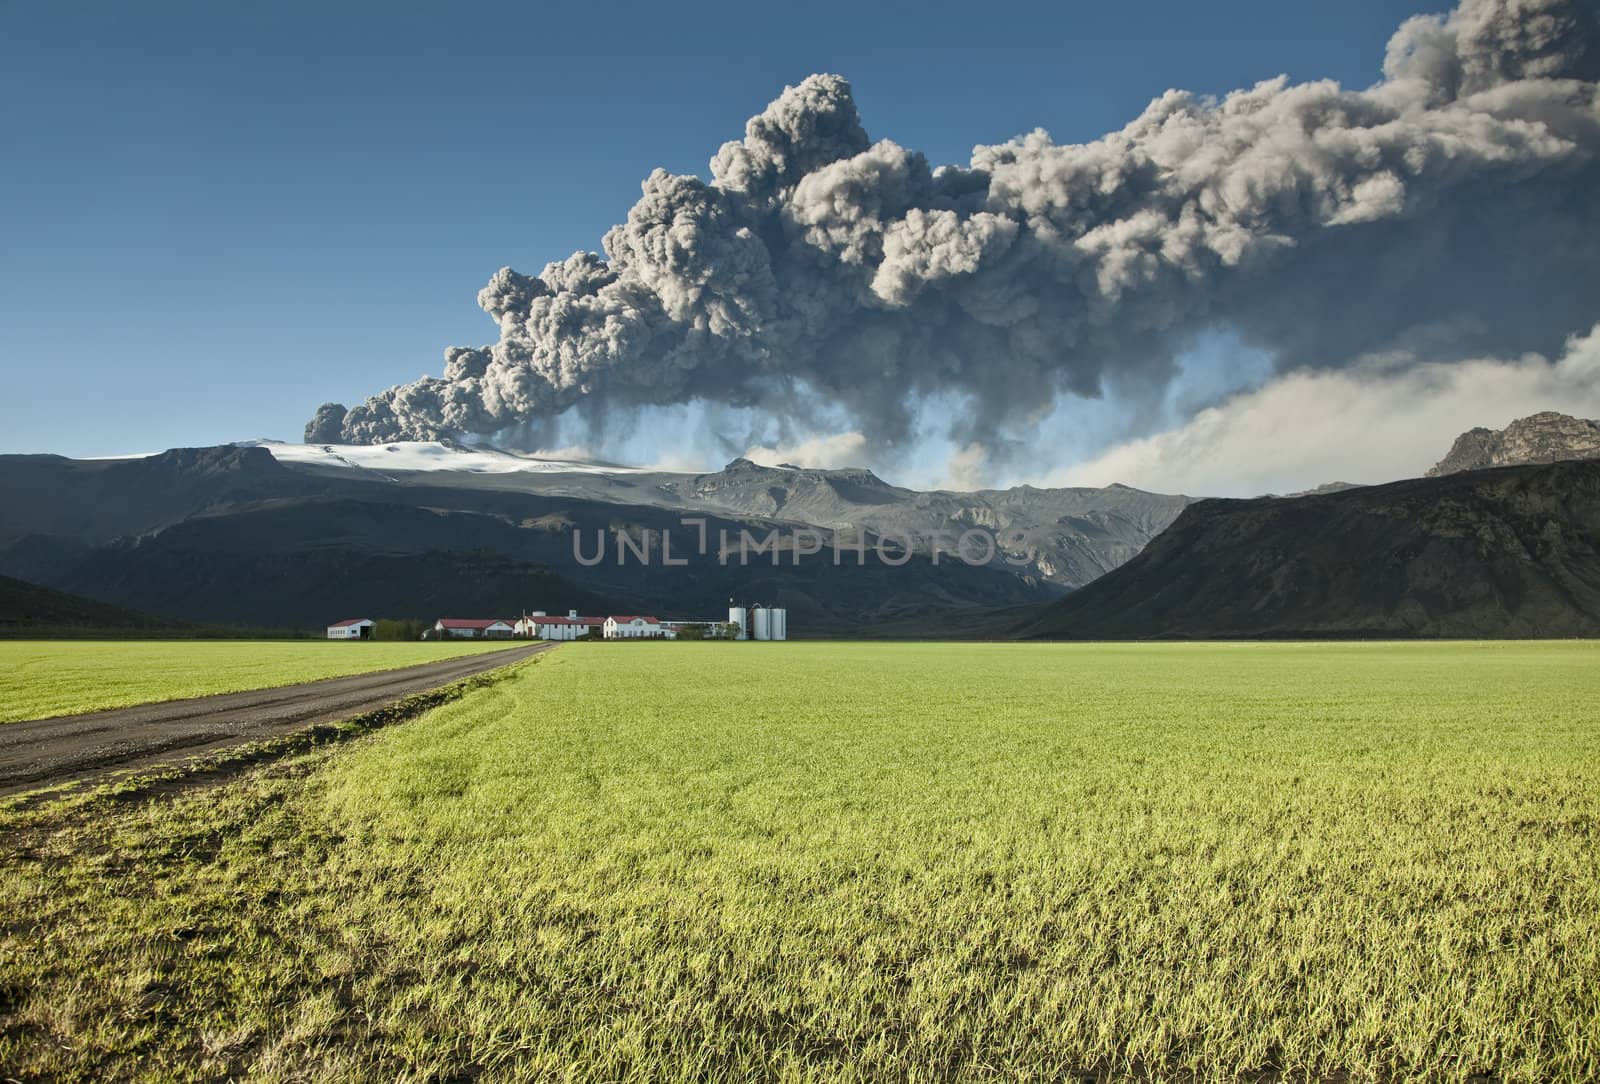 Ash cloud from the Eyjafjallajokull eruption in Iceland towering over a nearby farm